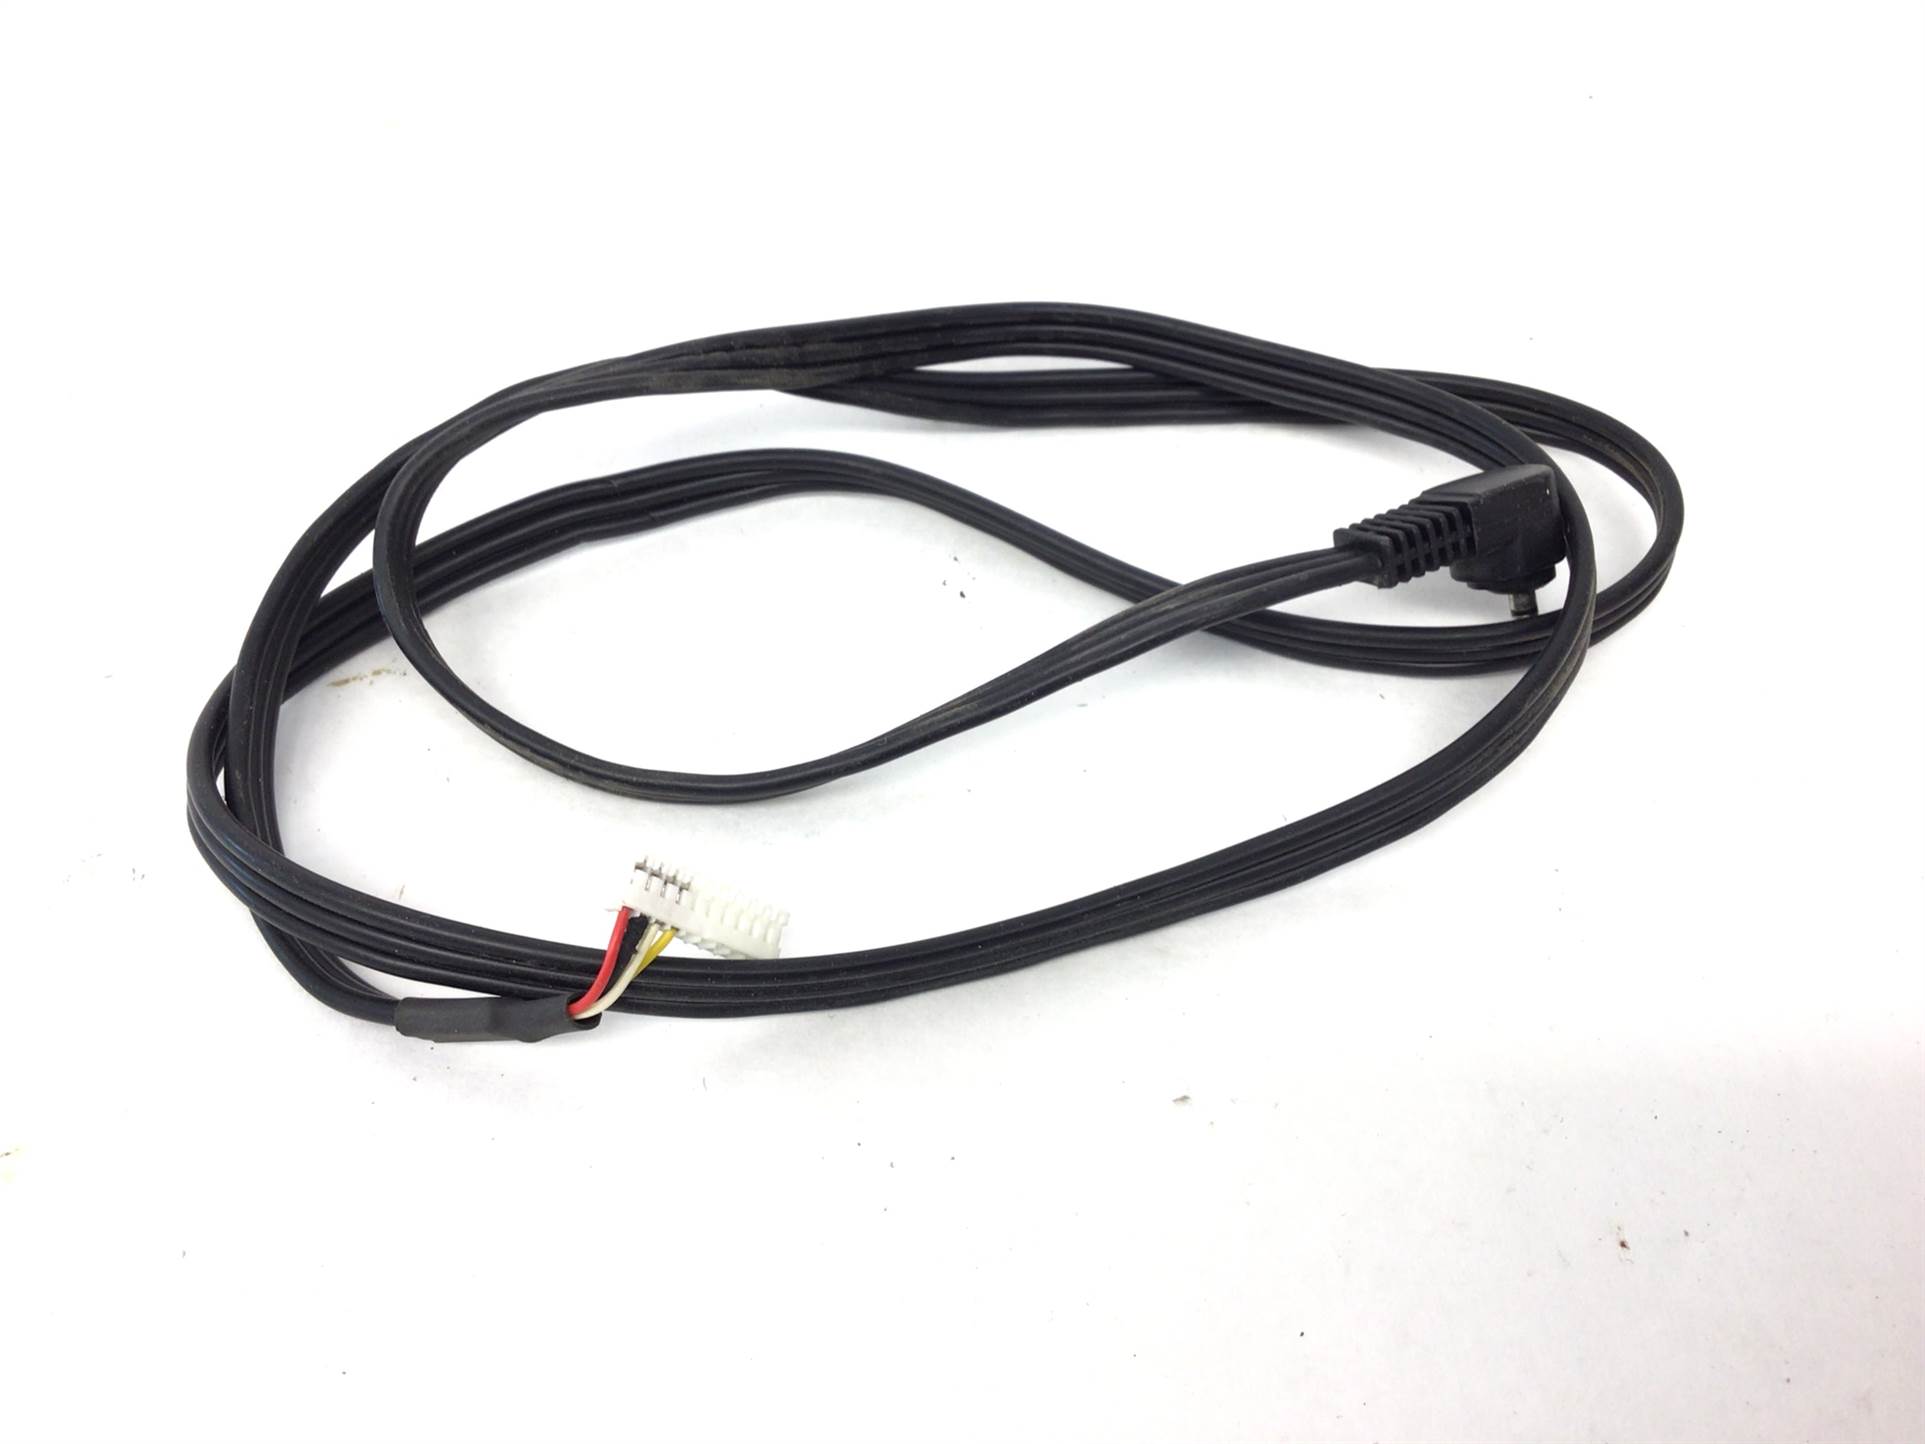 Audio Interconnect Wire Harness (Used)